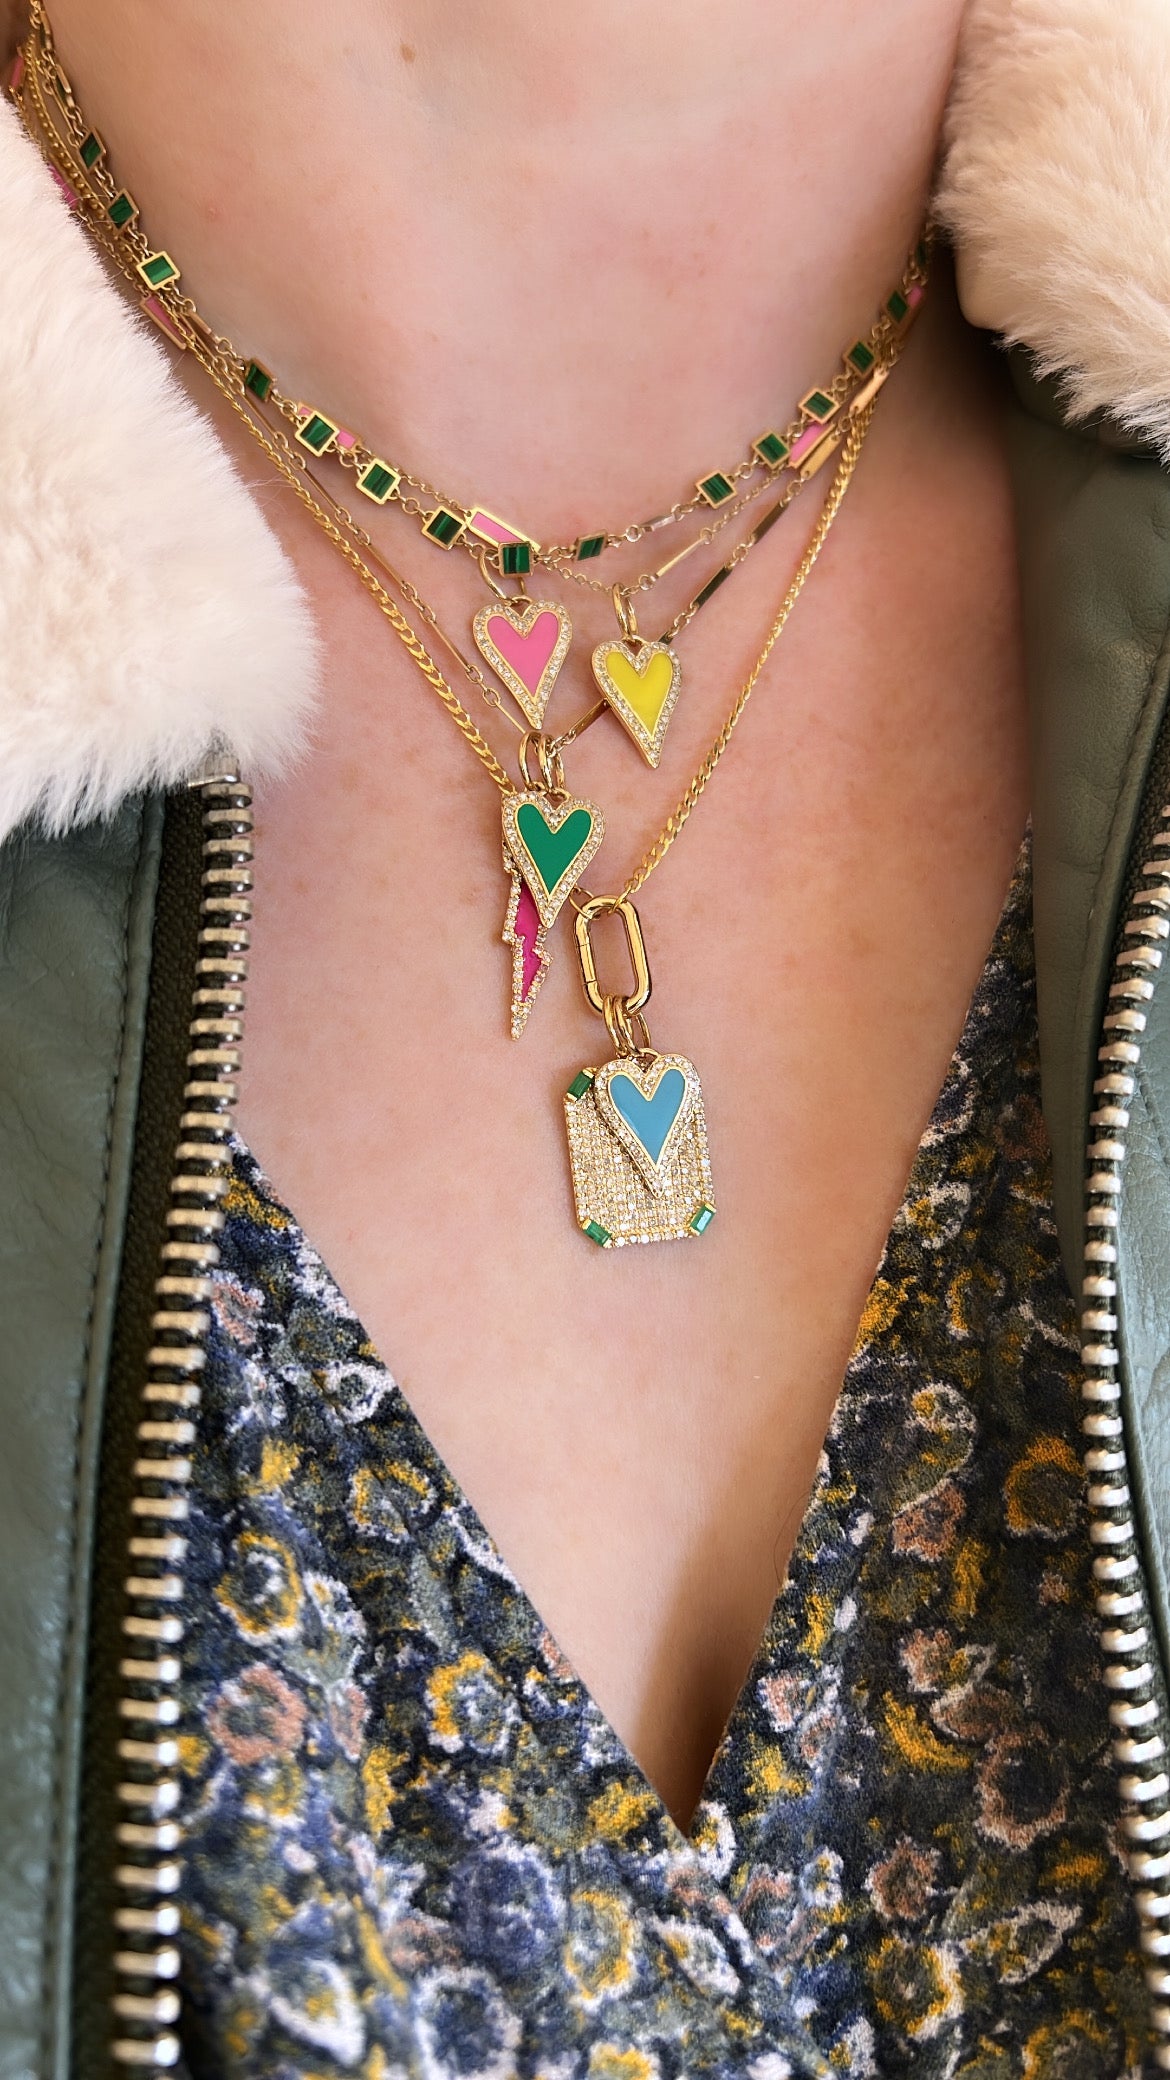 Colored Enamel Heart Chain Necklace in Gold